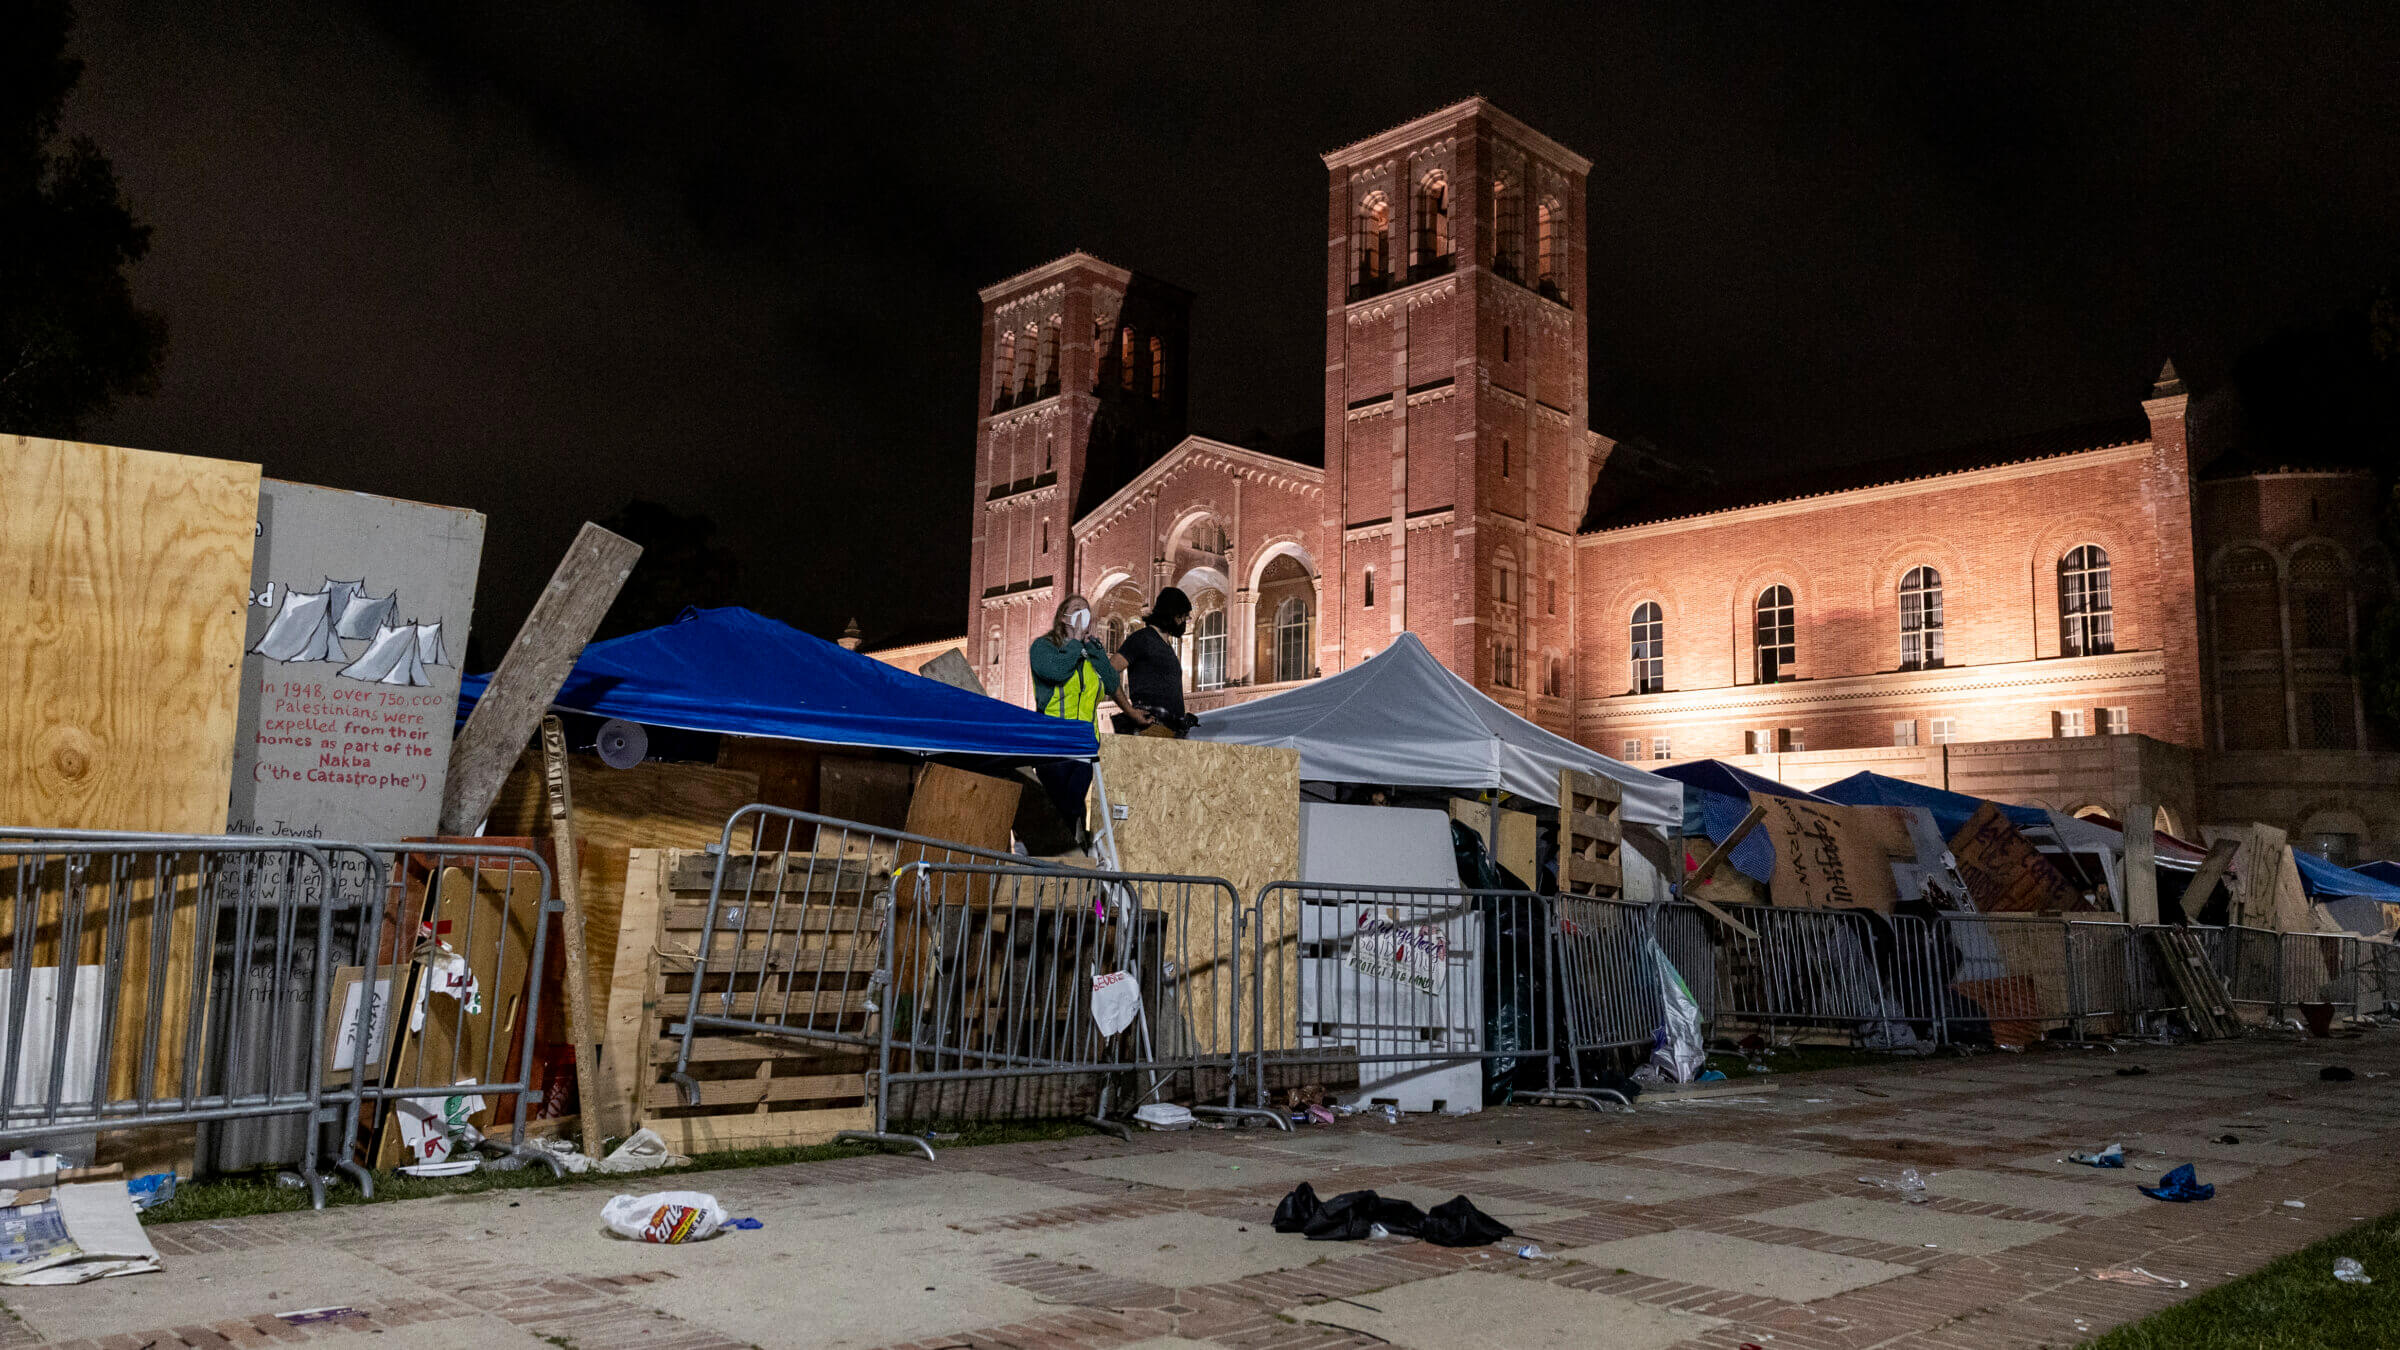 The pro-Palestinian encampment on the campus of UCLA May 1. Law enforcement dismantled it early the next day.